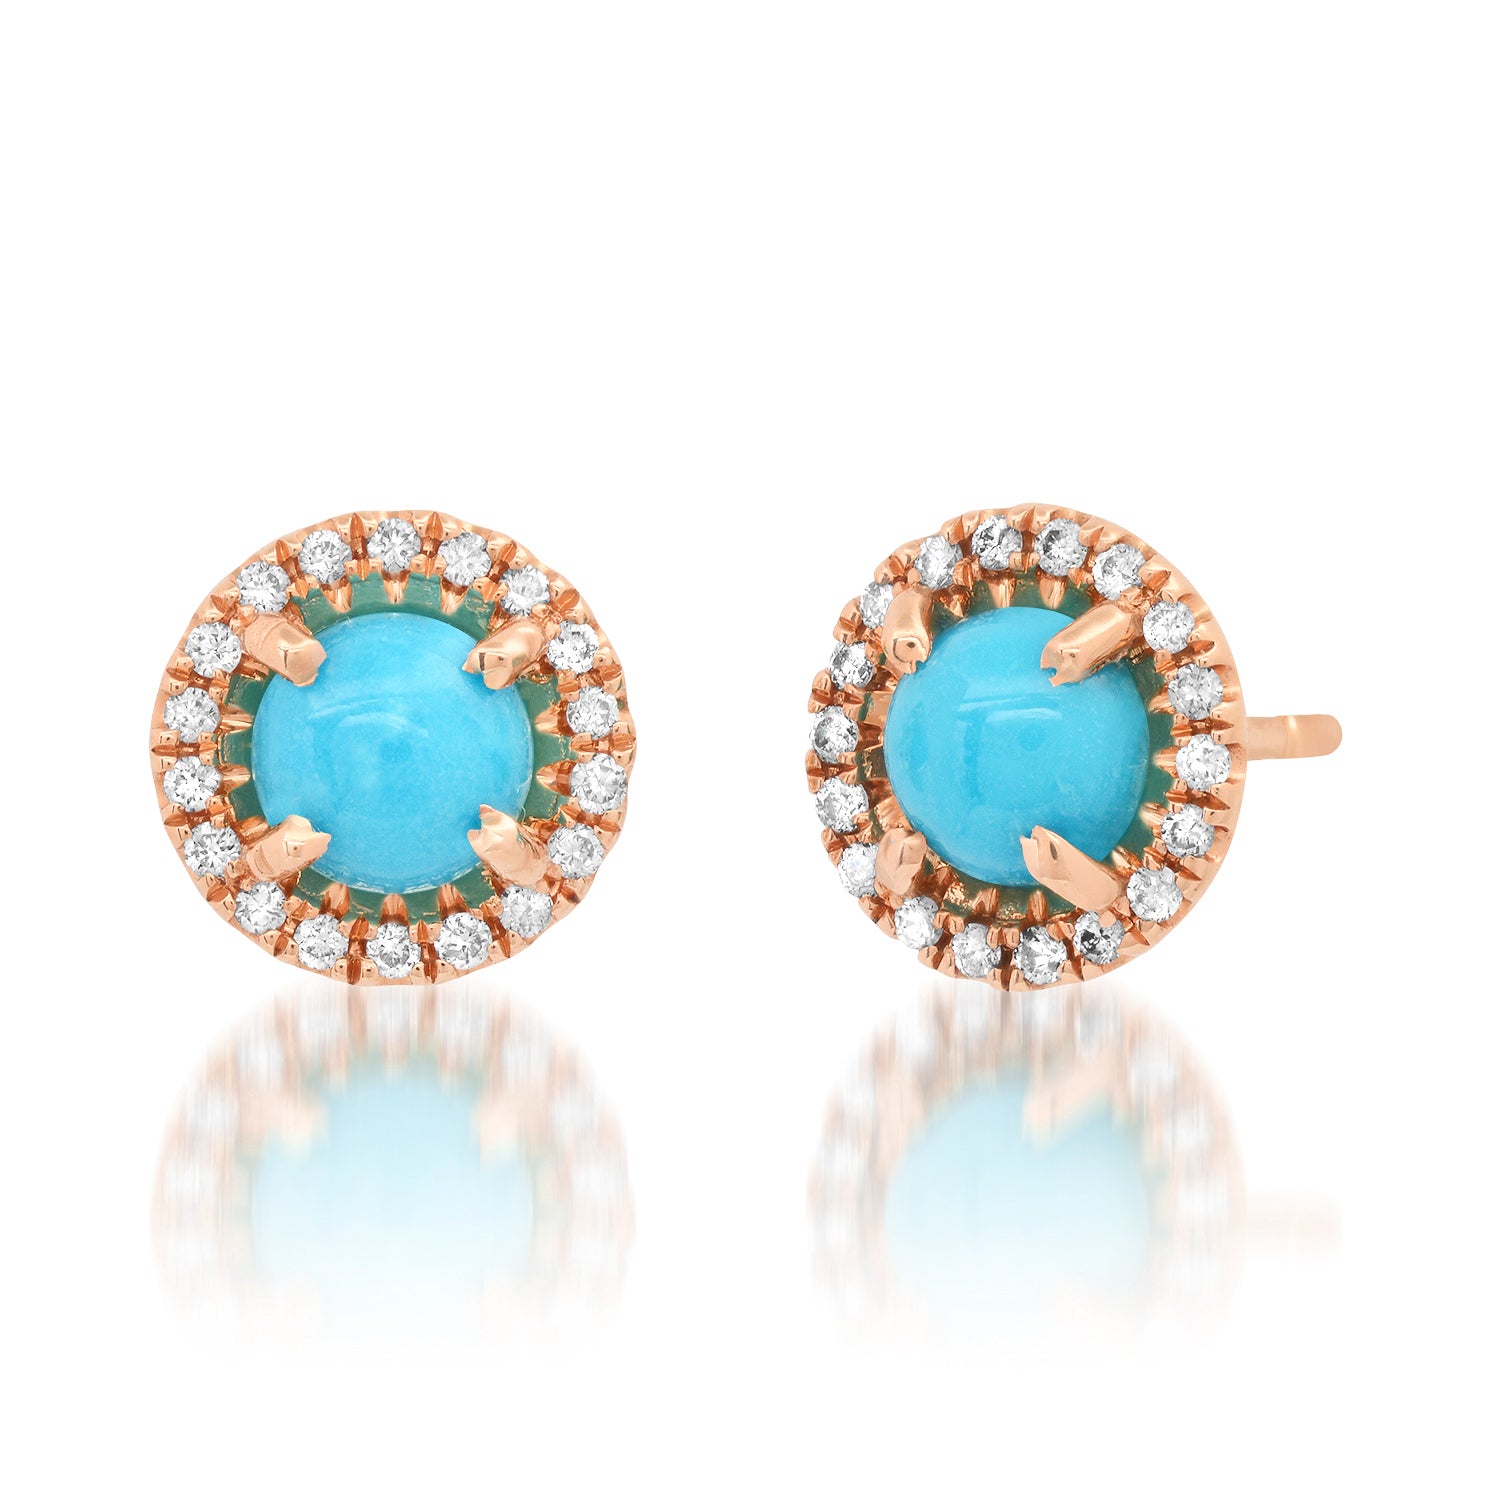 Round Turquoise Stud Earrings with Diamond Frame